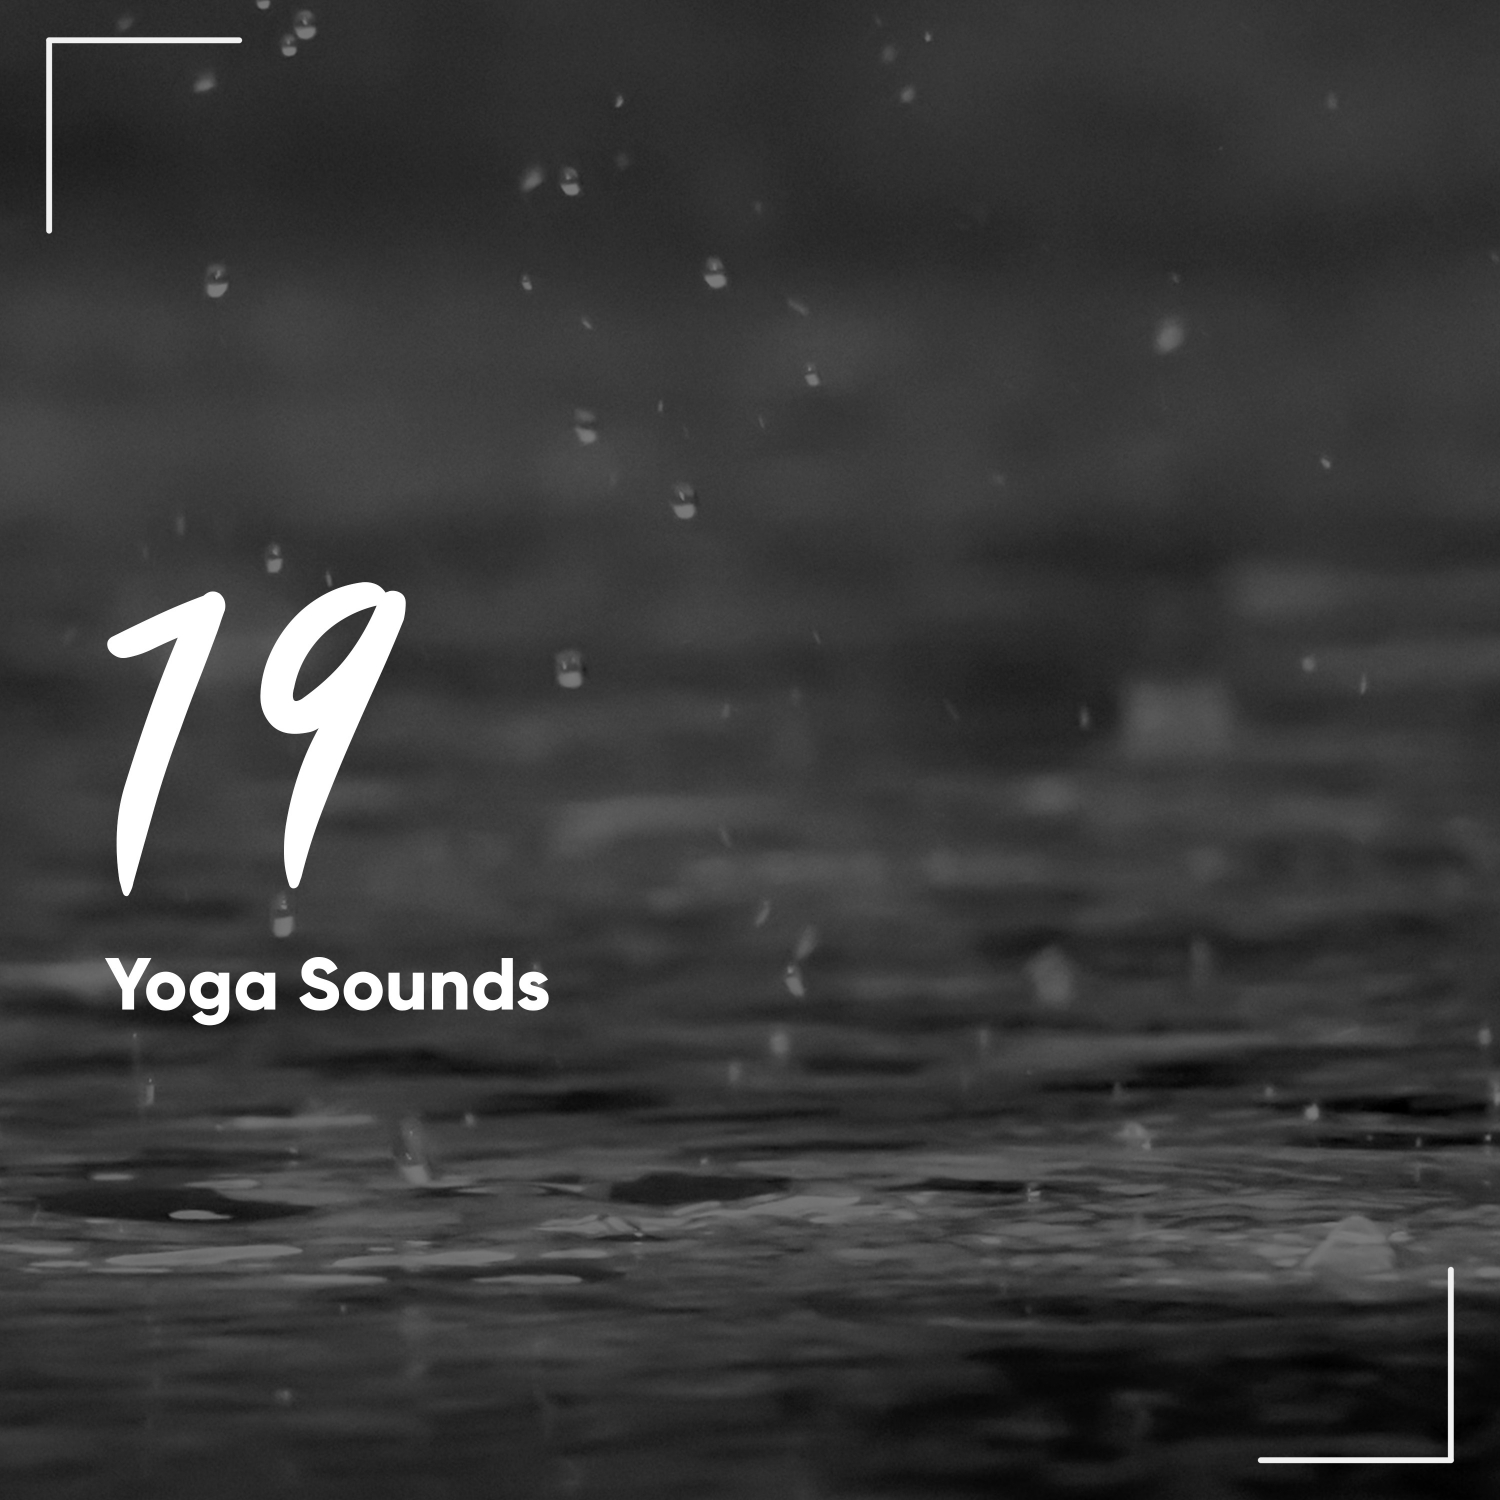 13 Rain Sounds for Spas. Thunder and Storms for Ultimate Relaxation